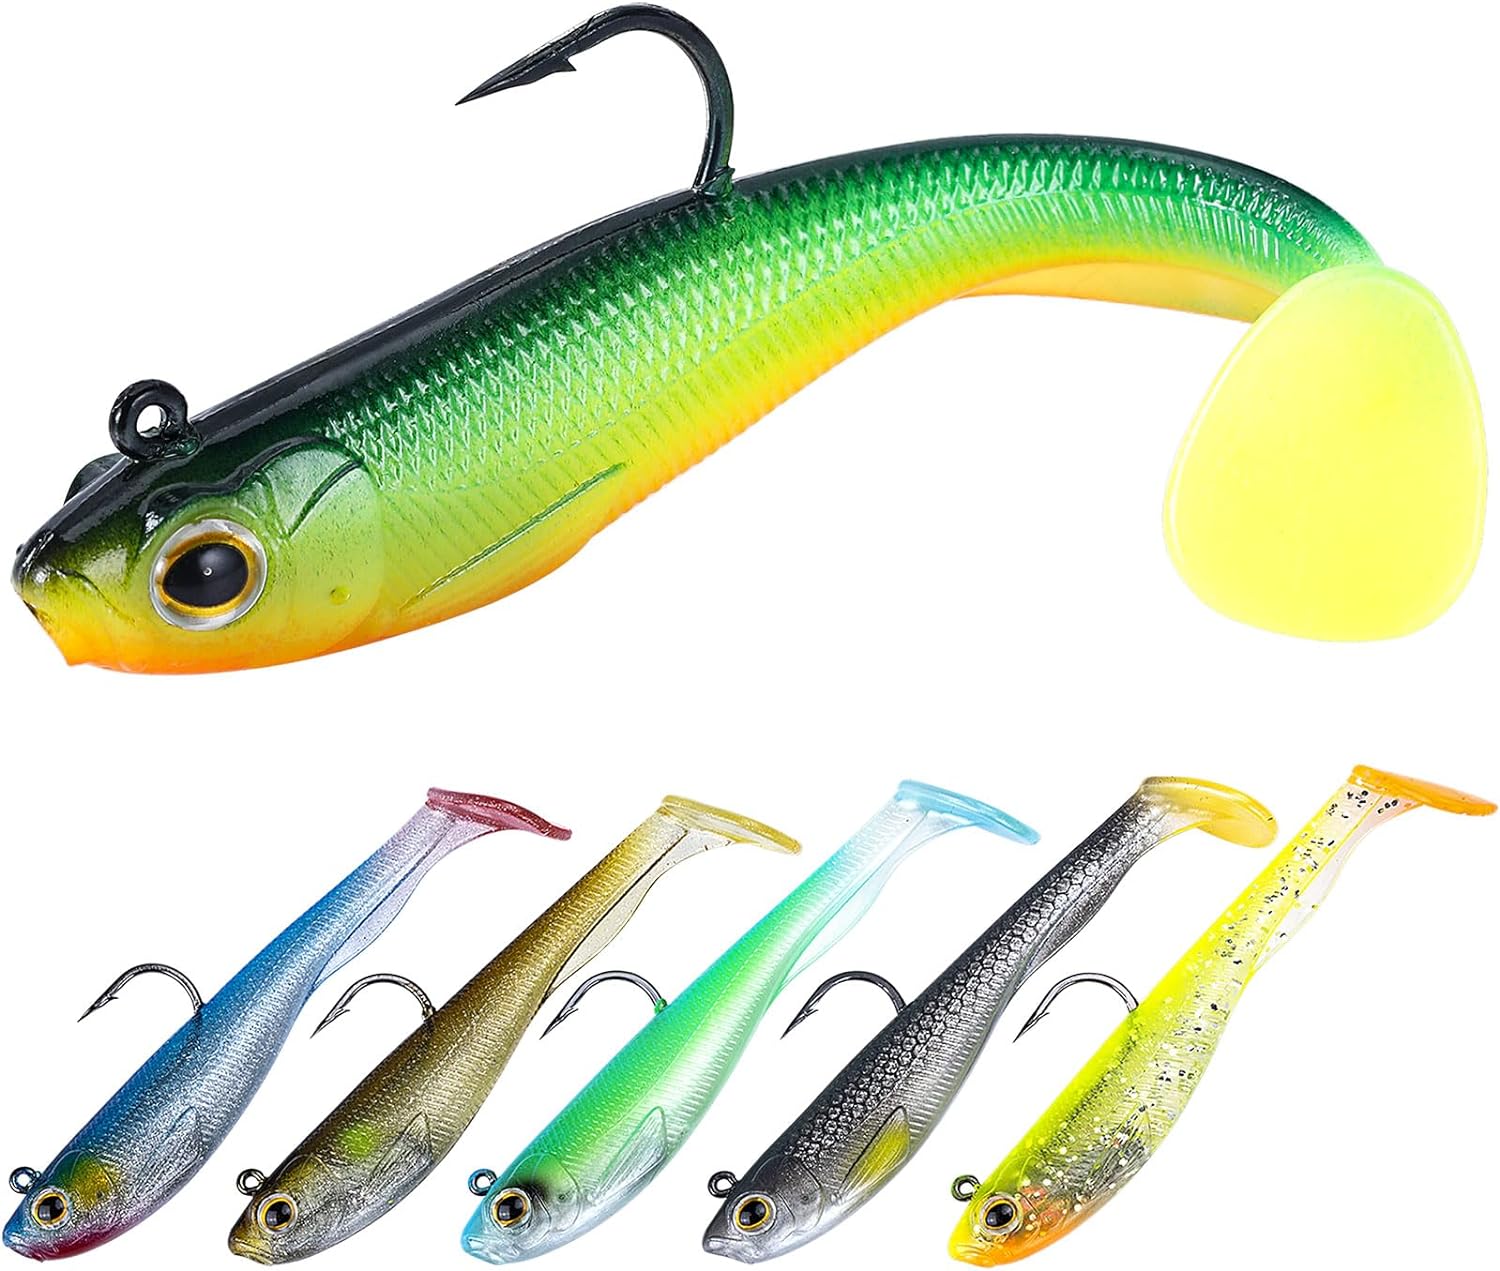 Fishing Lures Tail WholeSale - Price List, Bulk Buy at